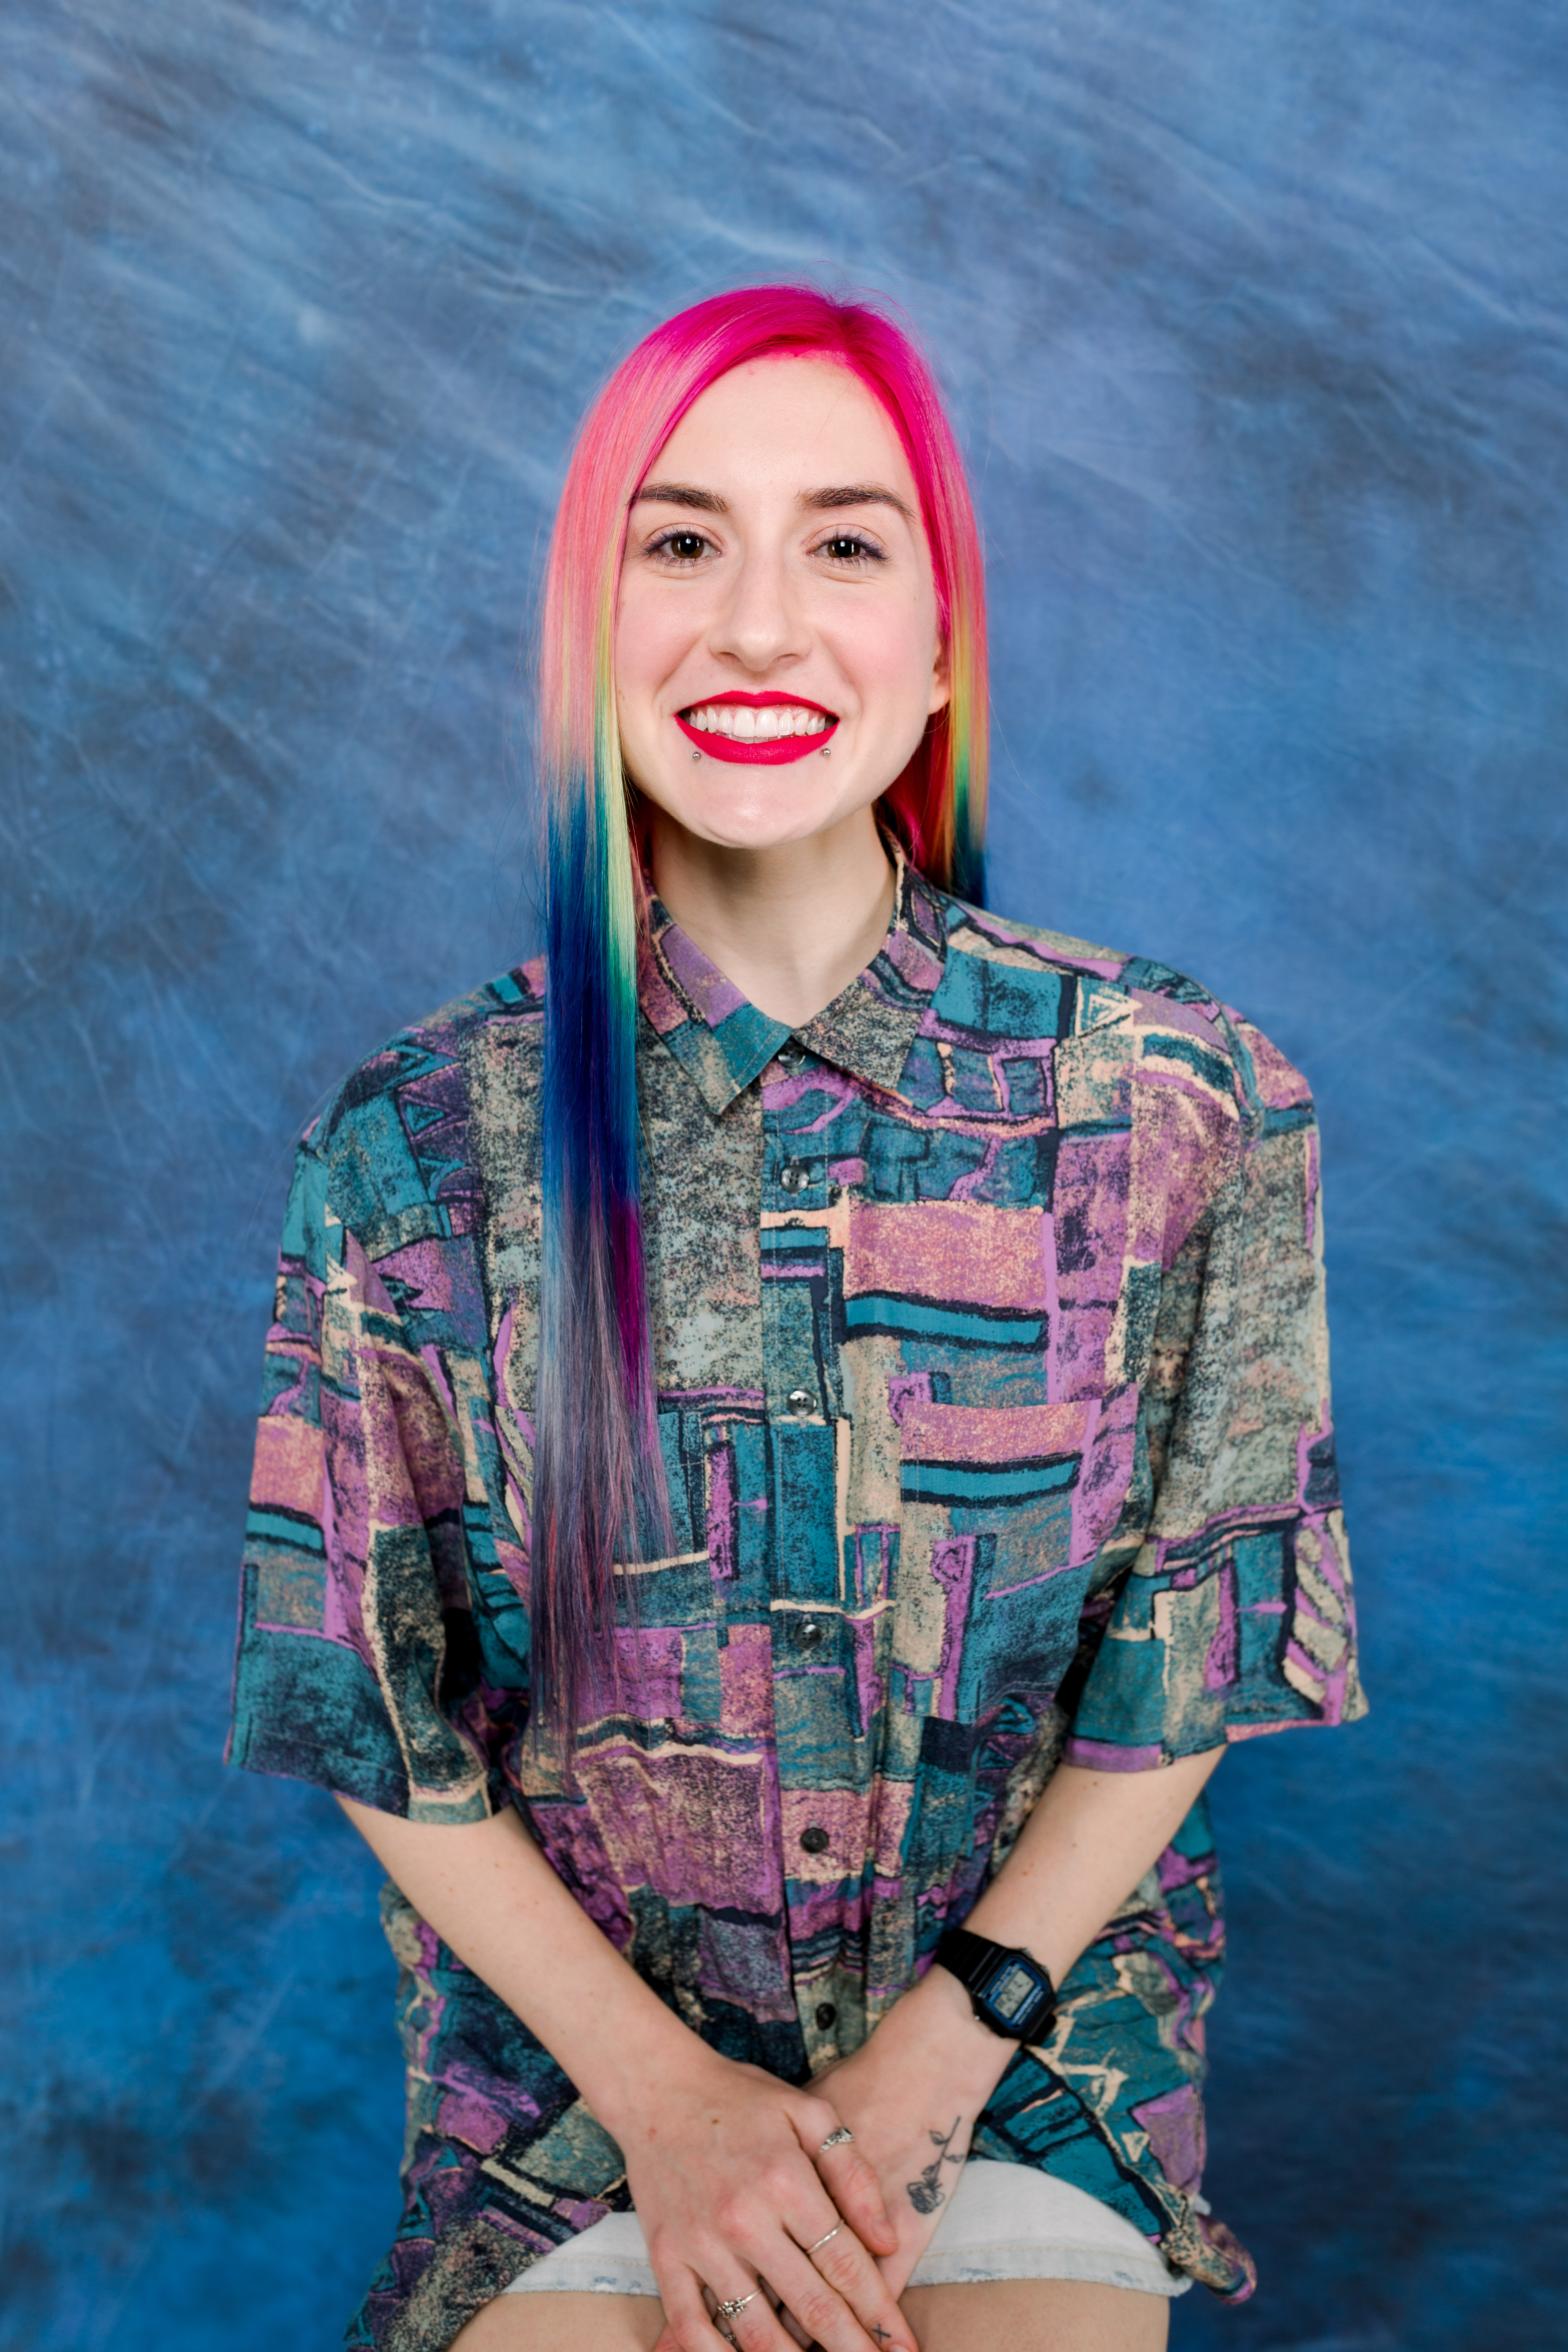 Saved By the Bell 90s inspired photoshoot with rainbow haired model portraying Screech in Alpharetta GA by Jill Blue Photography and Glitter and Geeks Salon